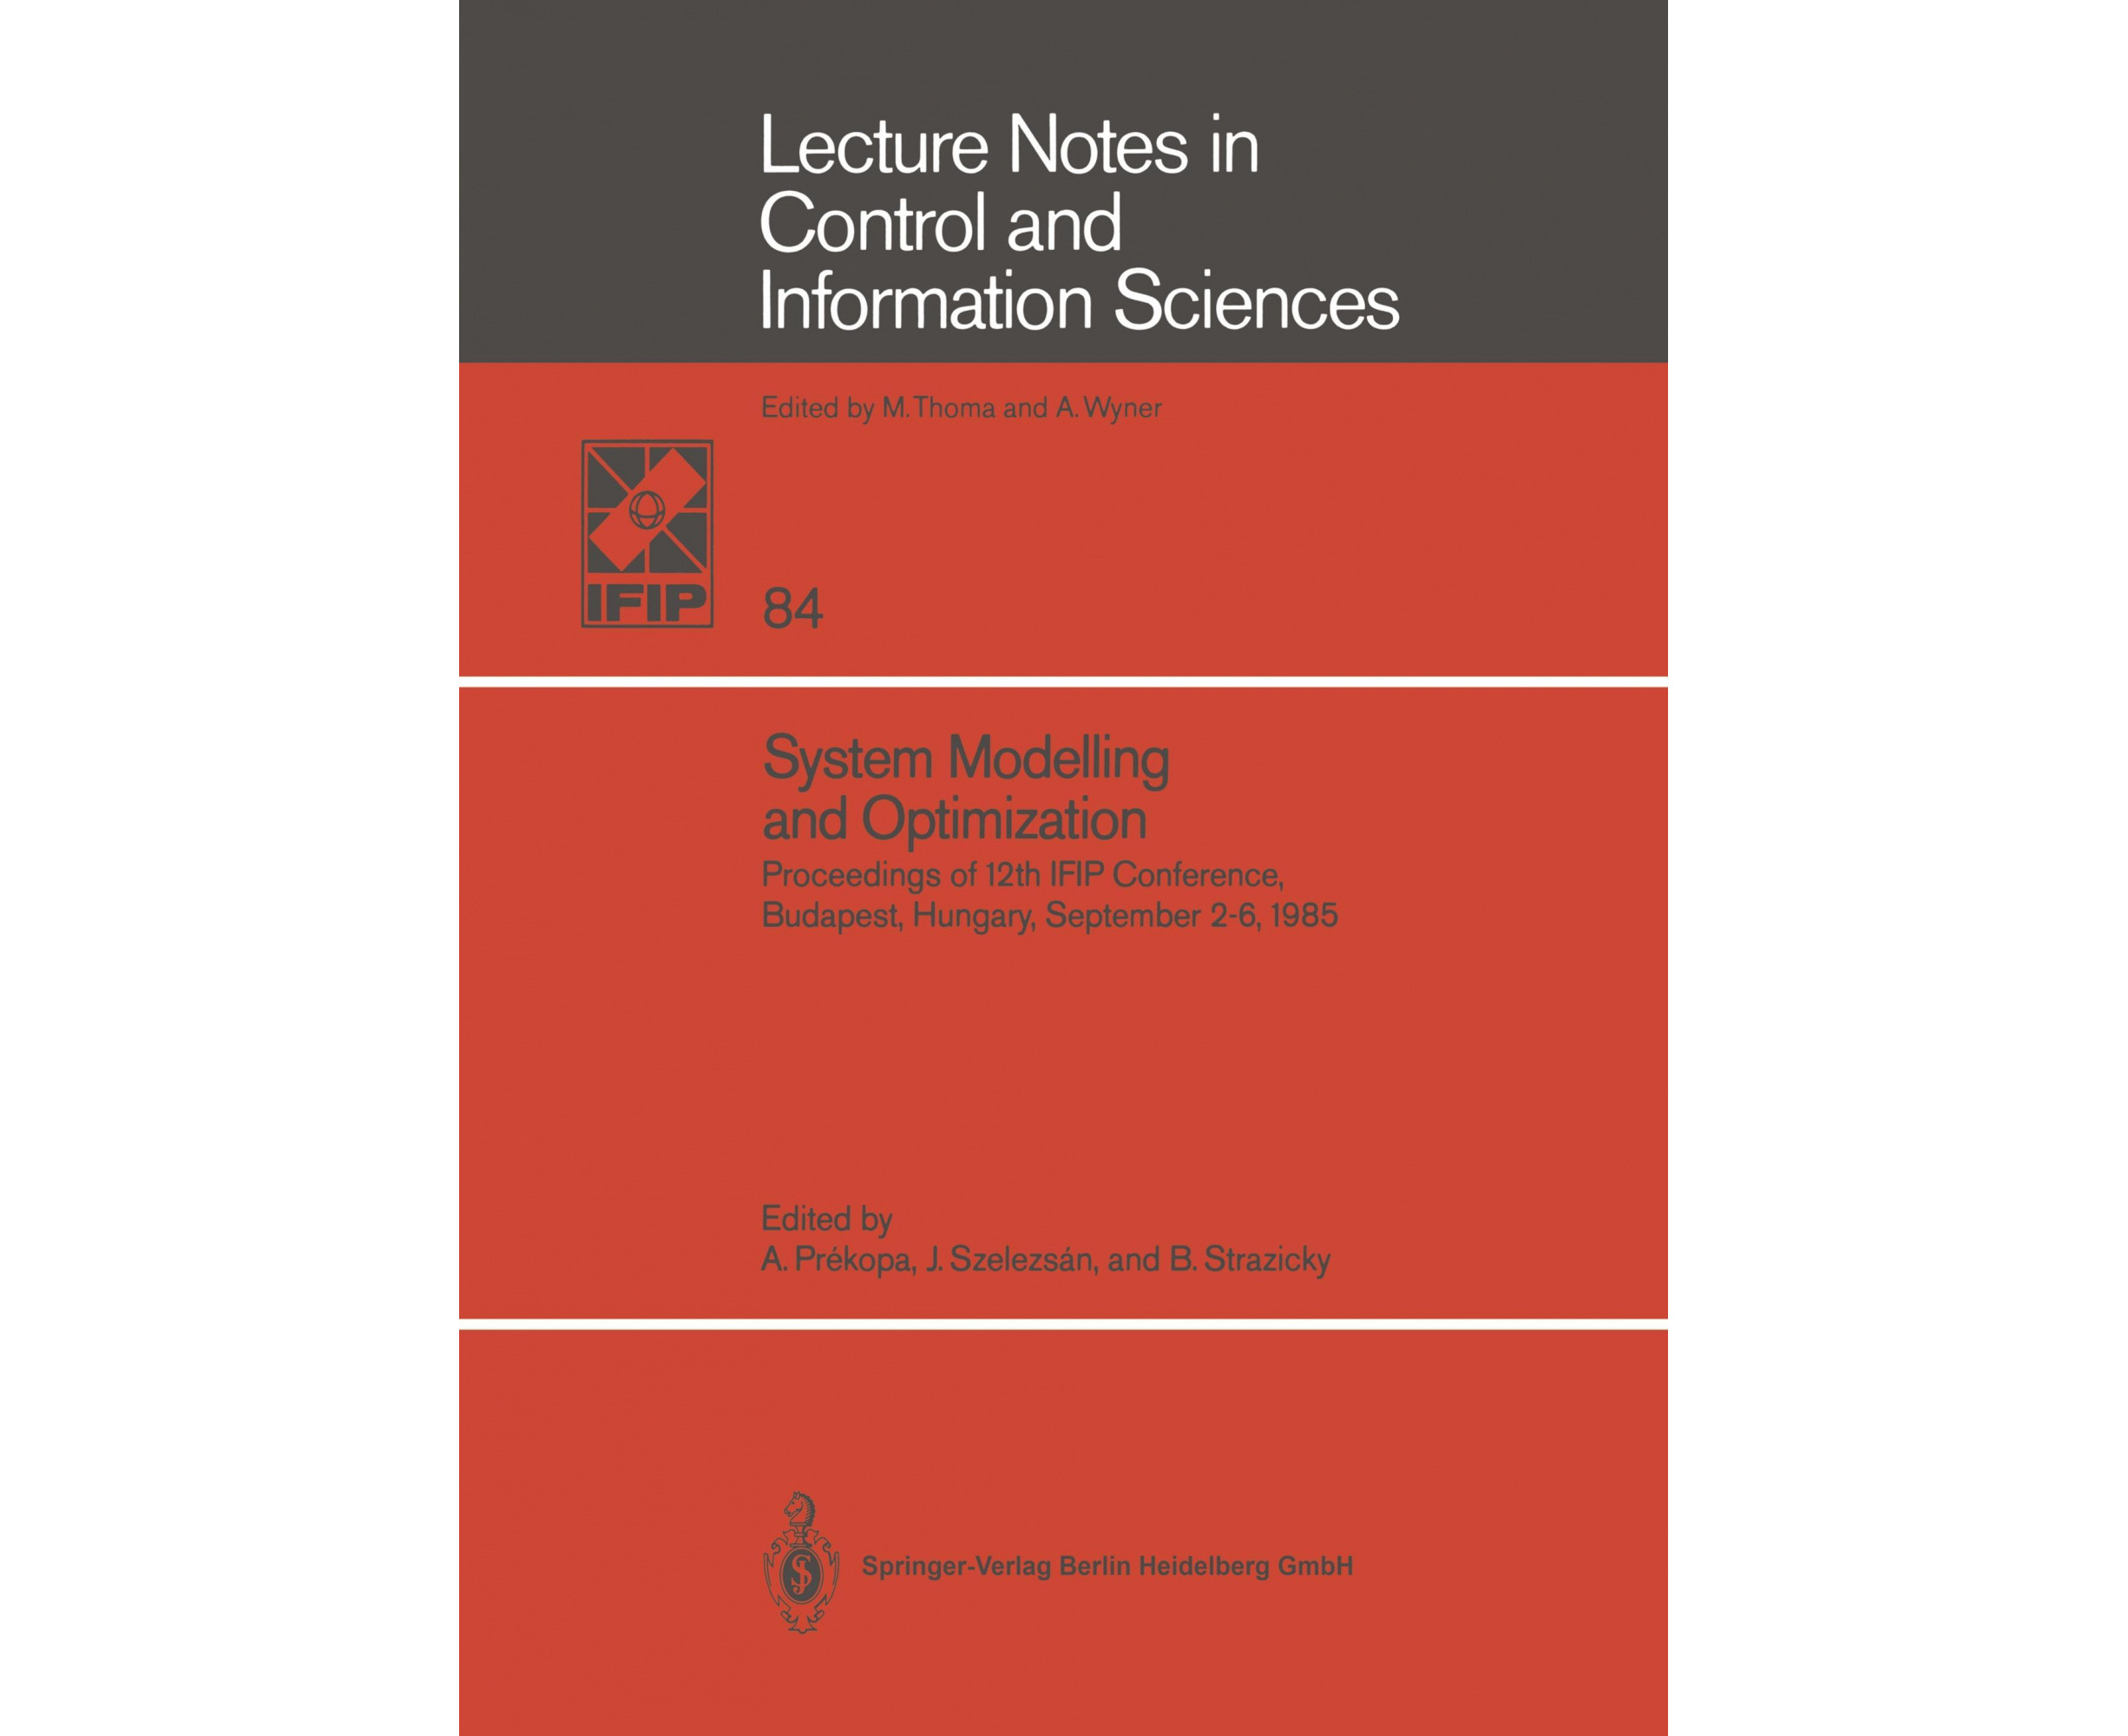 and　the　1985　Control　Notes　in　Modelling　(Lecture　System　2-6,　Optimization:　Budapest,　September　Hungary,　Conference,　IFIP　Proceedings　12th　of　and　Informatio